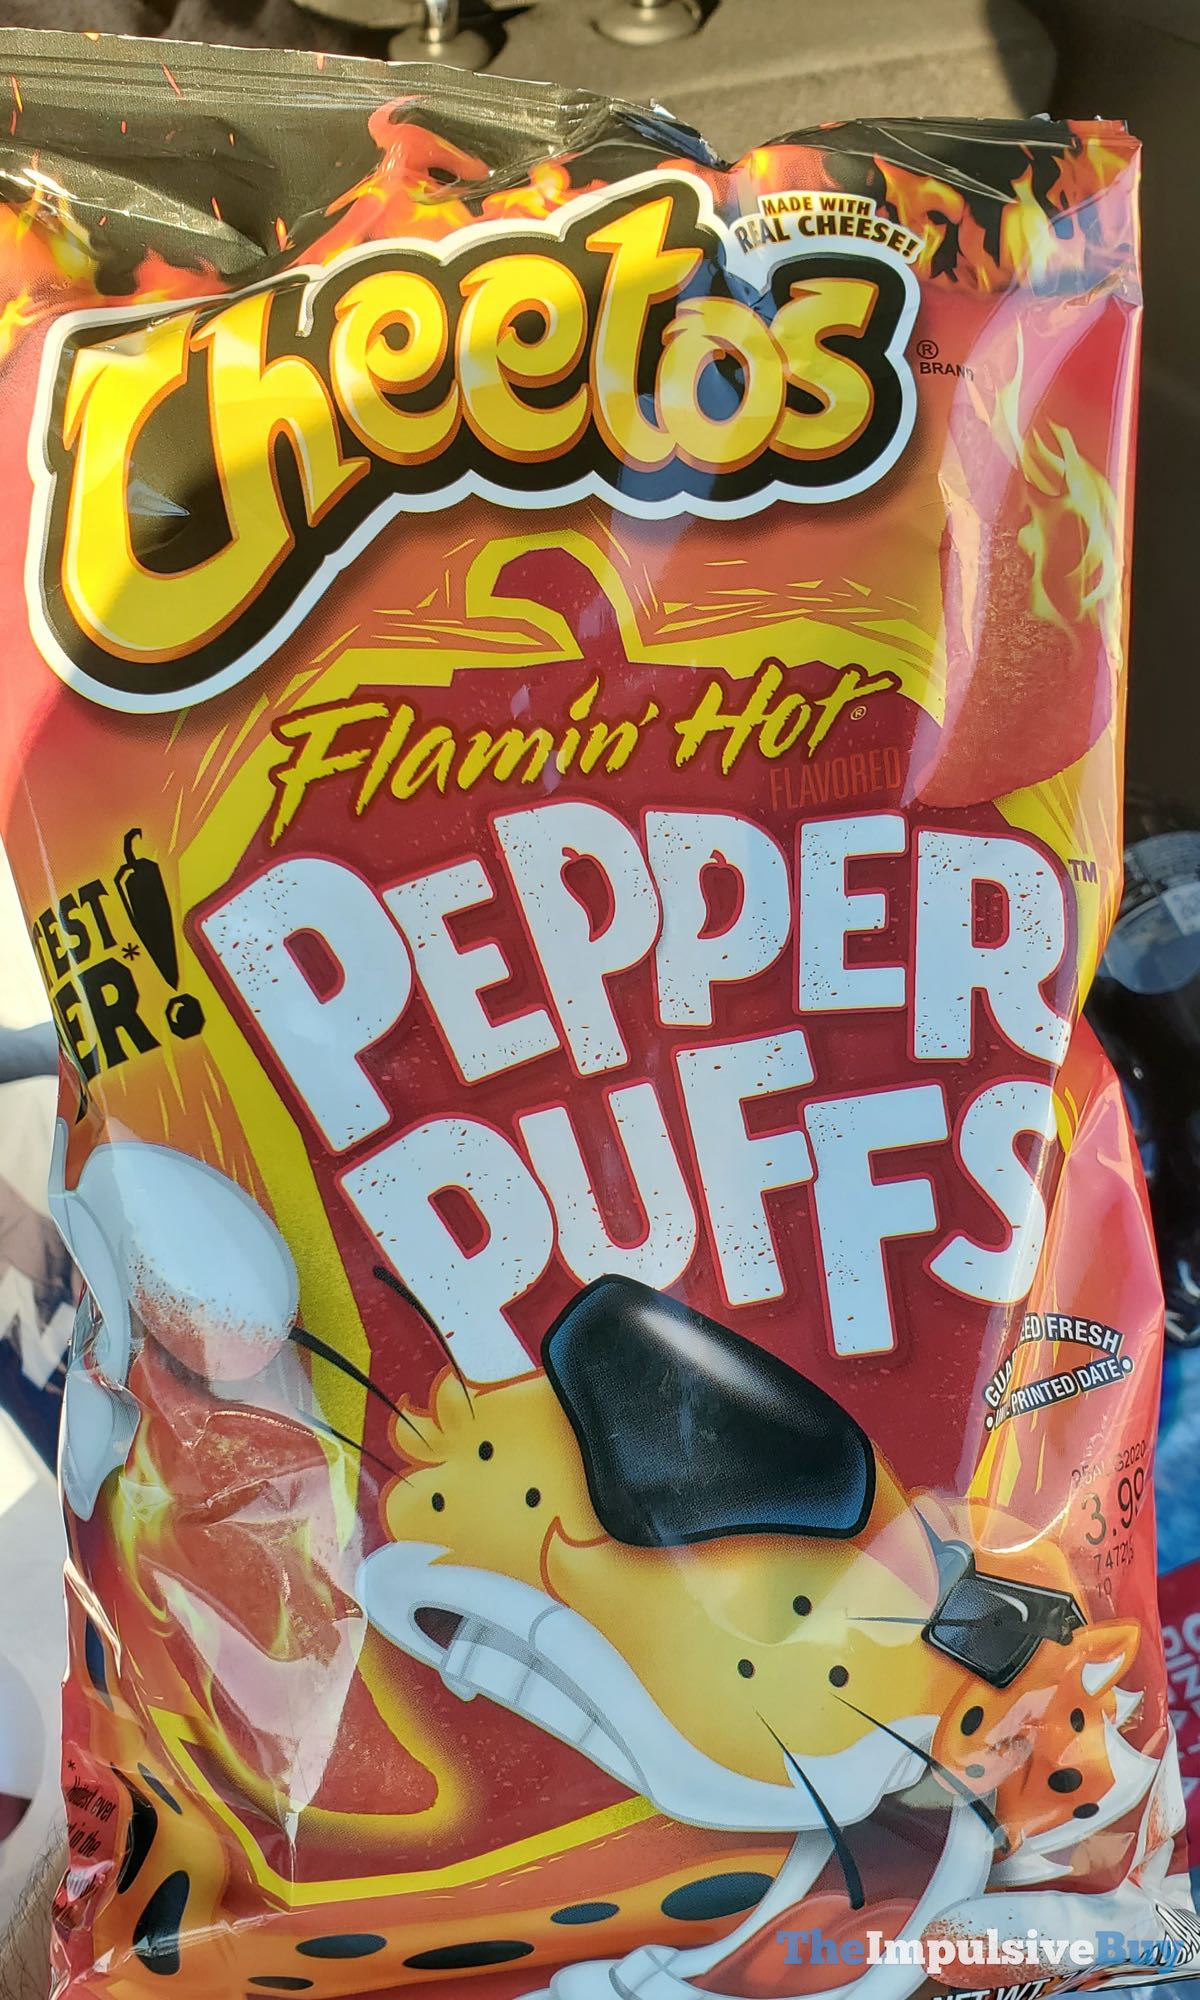 SPOTTED: Cheetos Flamin' Hot Pepper Puffs - The Impulsive Buy.